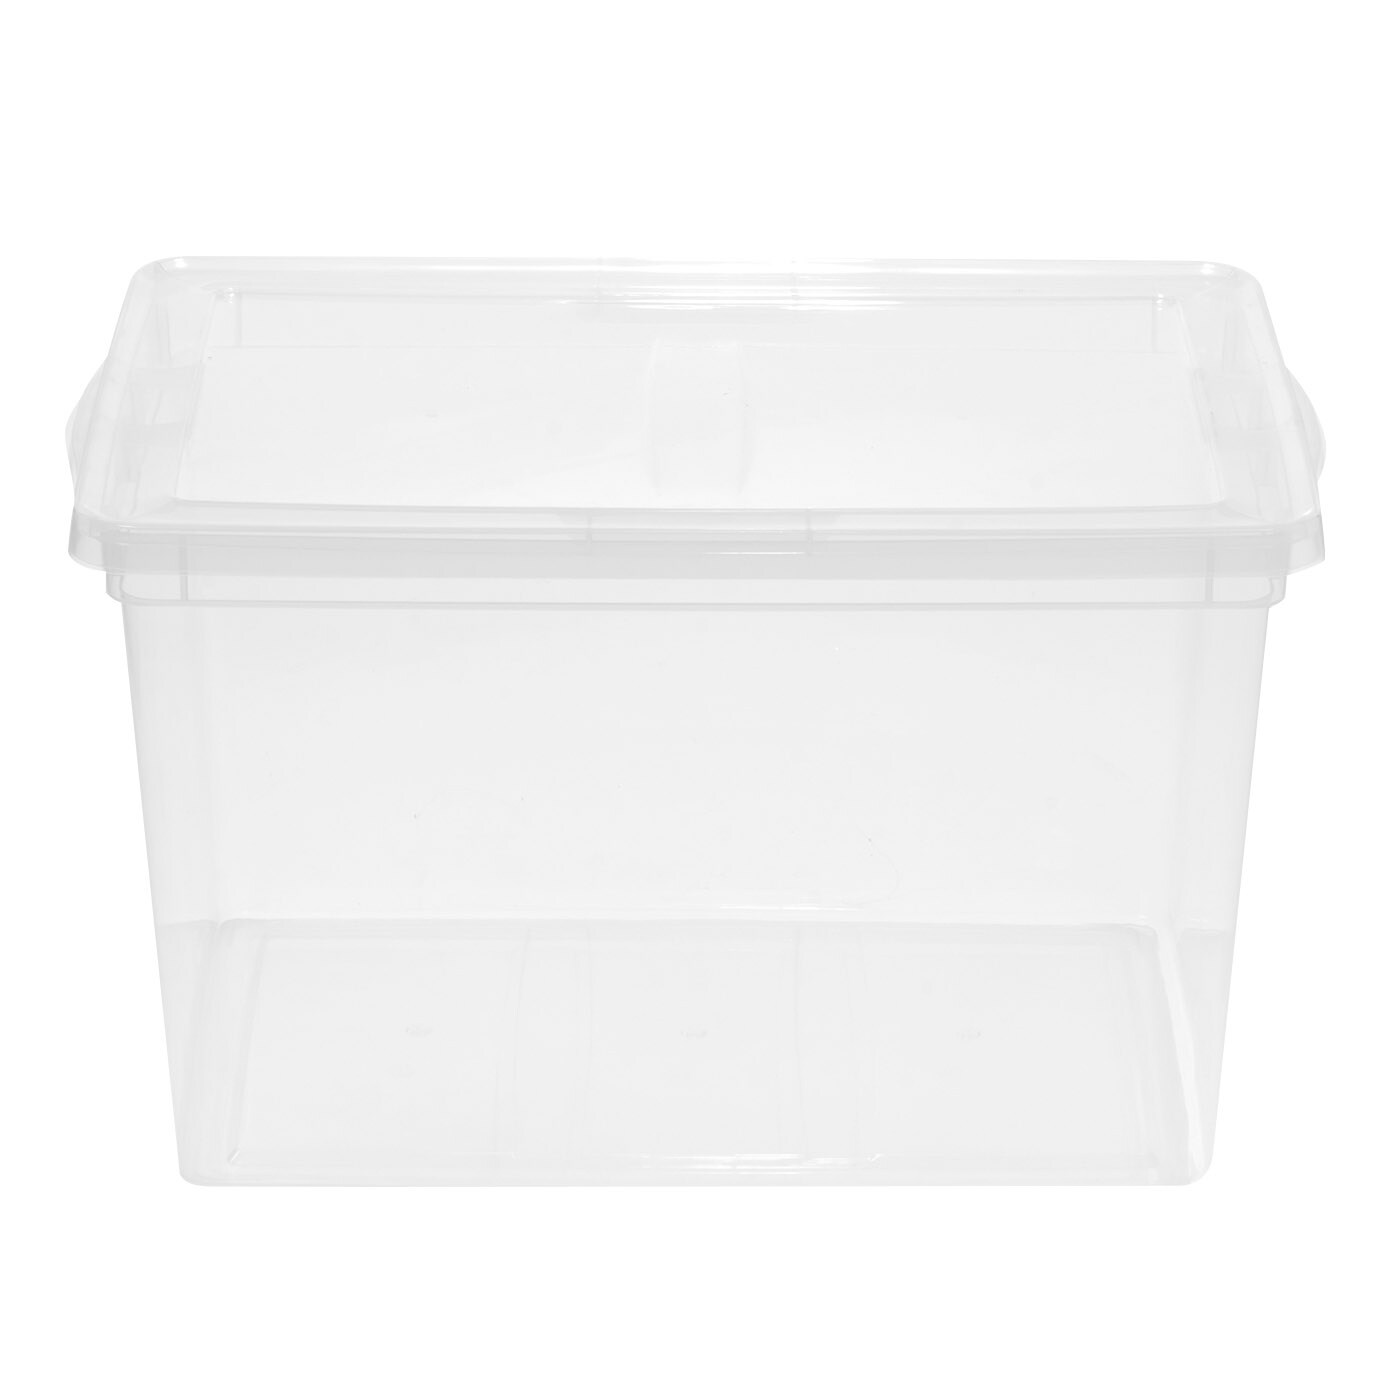 55 Gallon Plastic Storage Container w/ Snap-On Lid